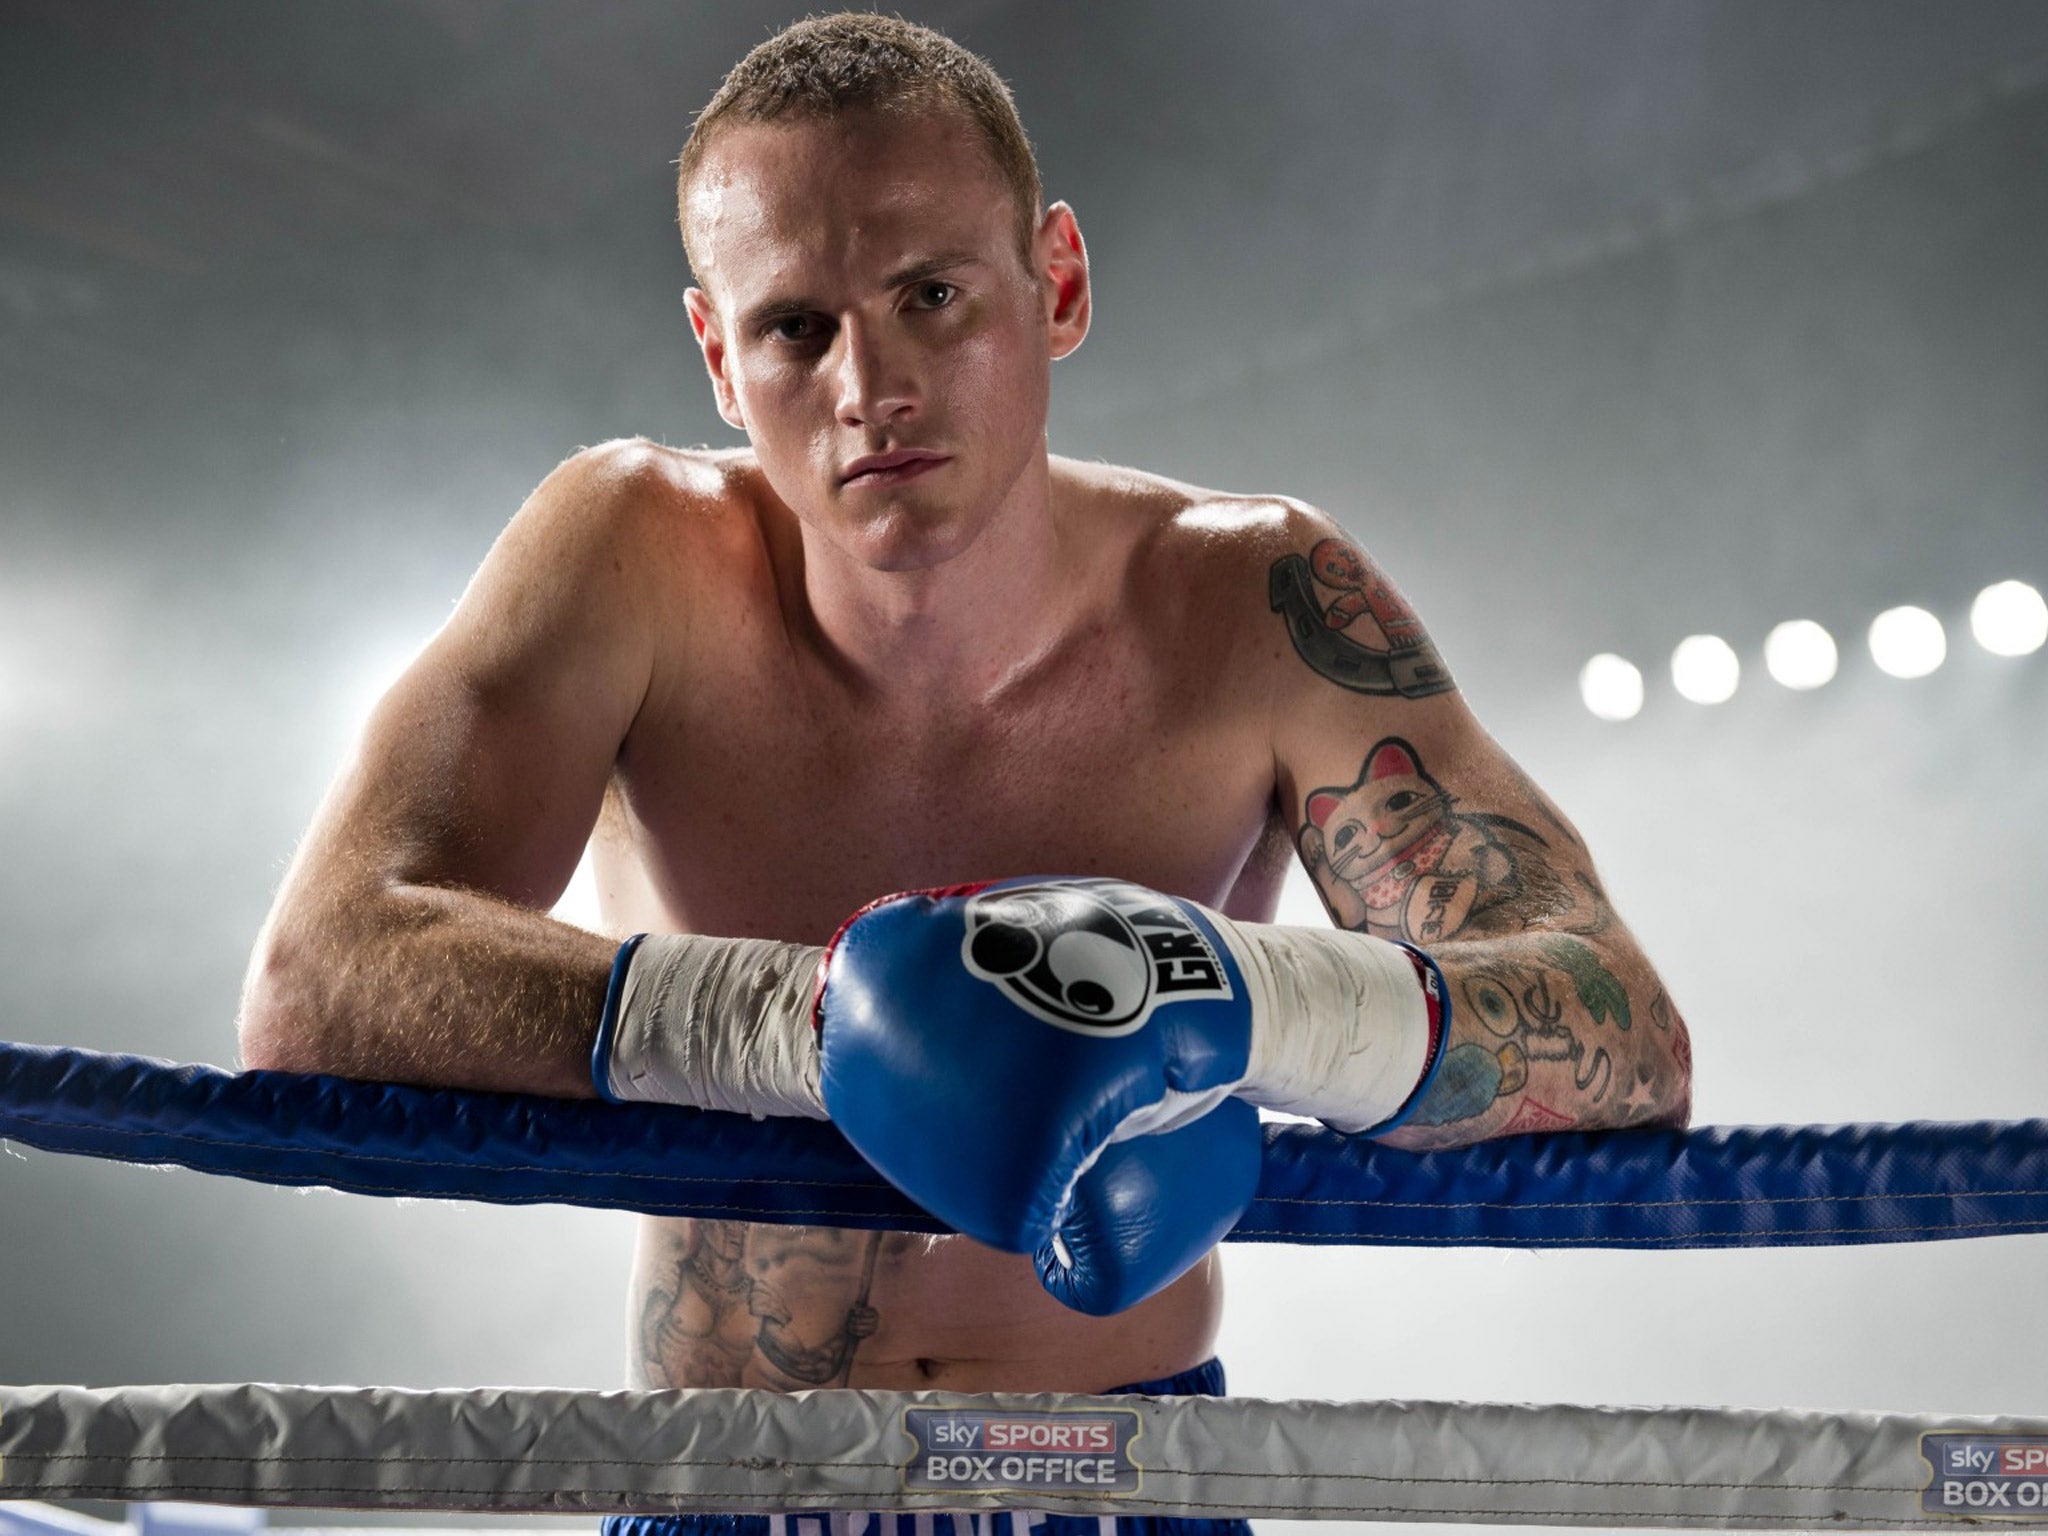 Carl Froch has said that George Groves (pictured) ‘has something about him’ and expects a hard fight